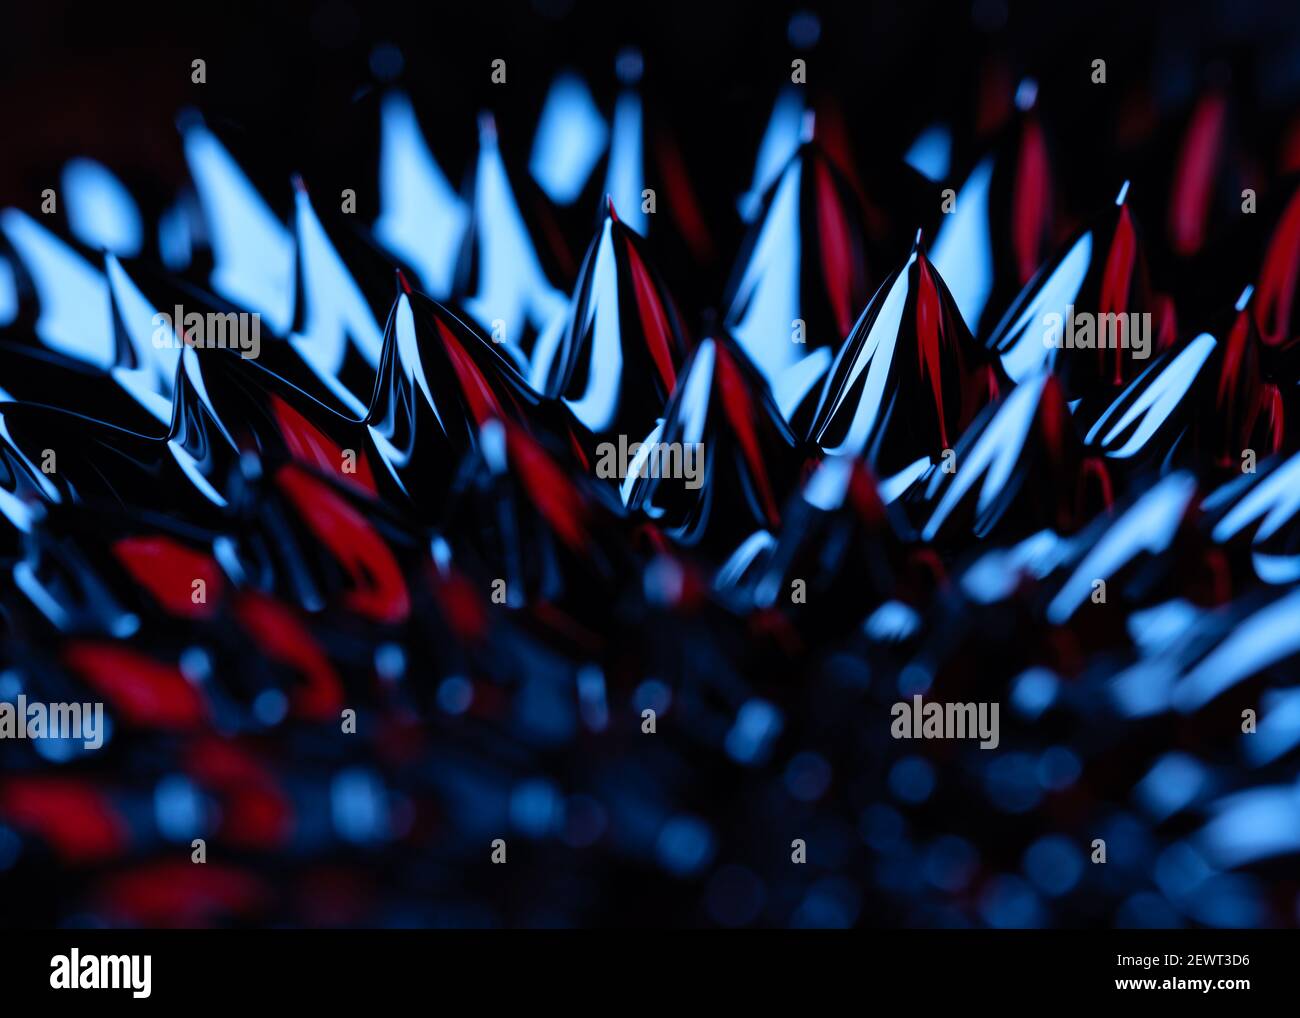 A close up macro image of ferrofluid reacting to a magnetic force, showing the spikes that form lit with blue and red lighting. Stock Photo